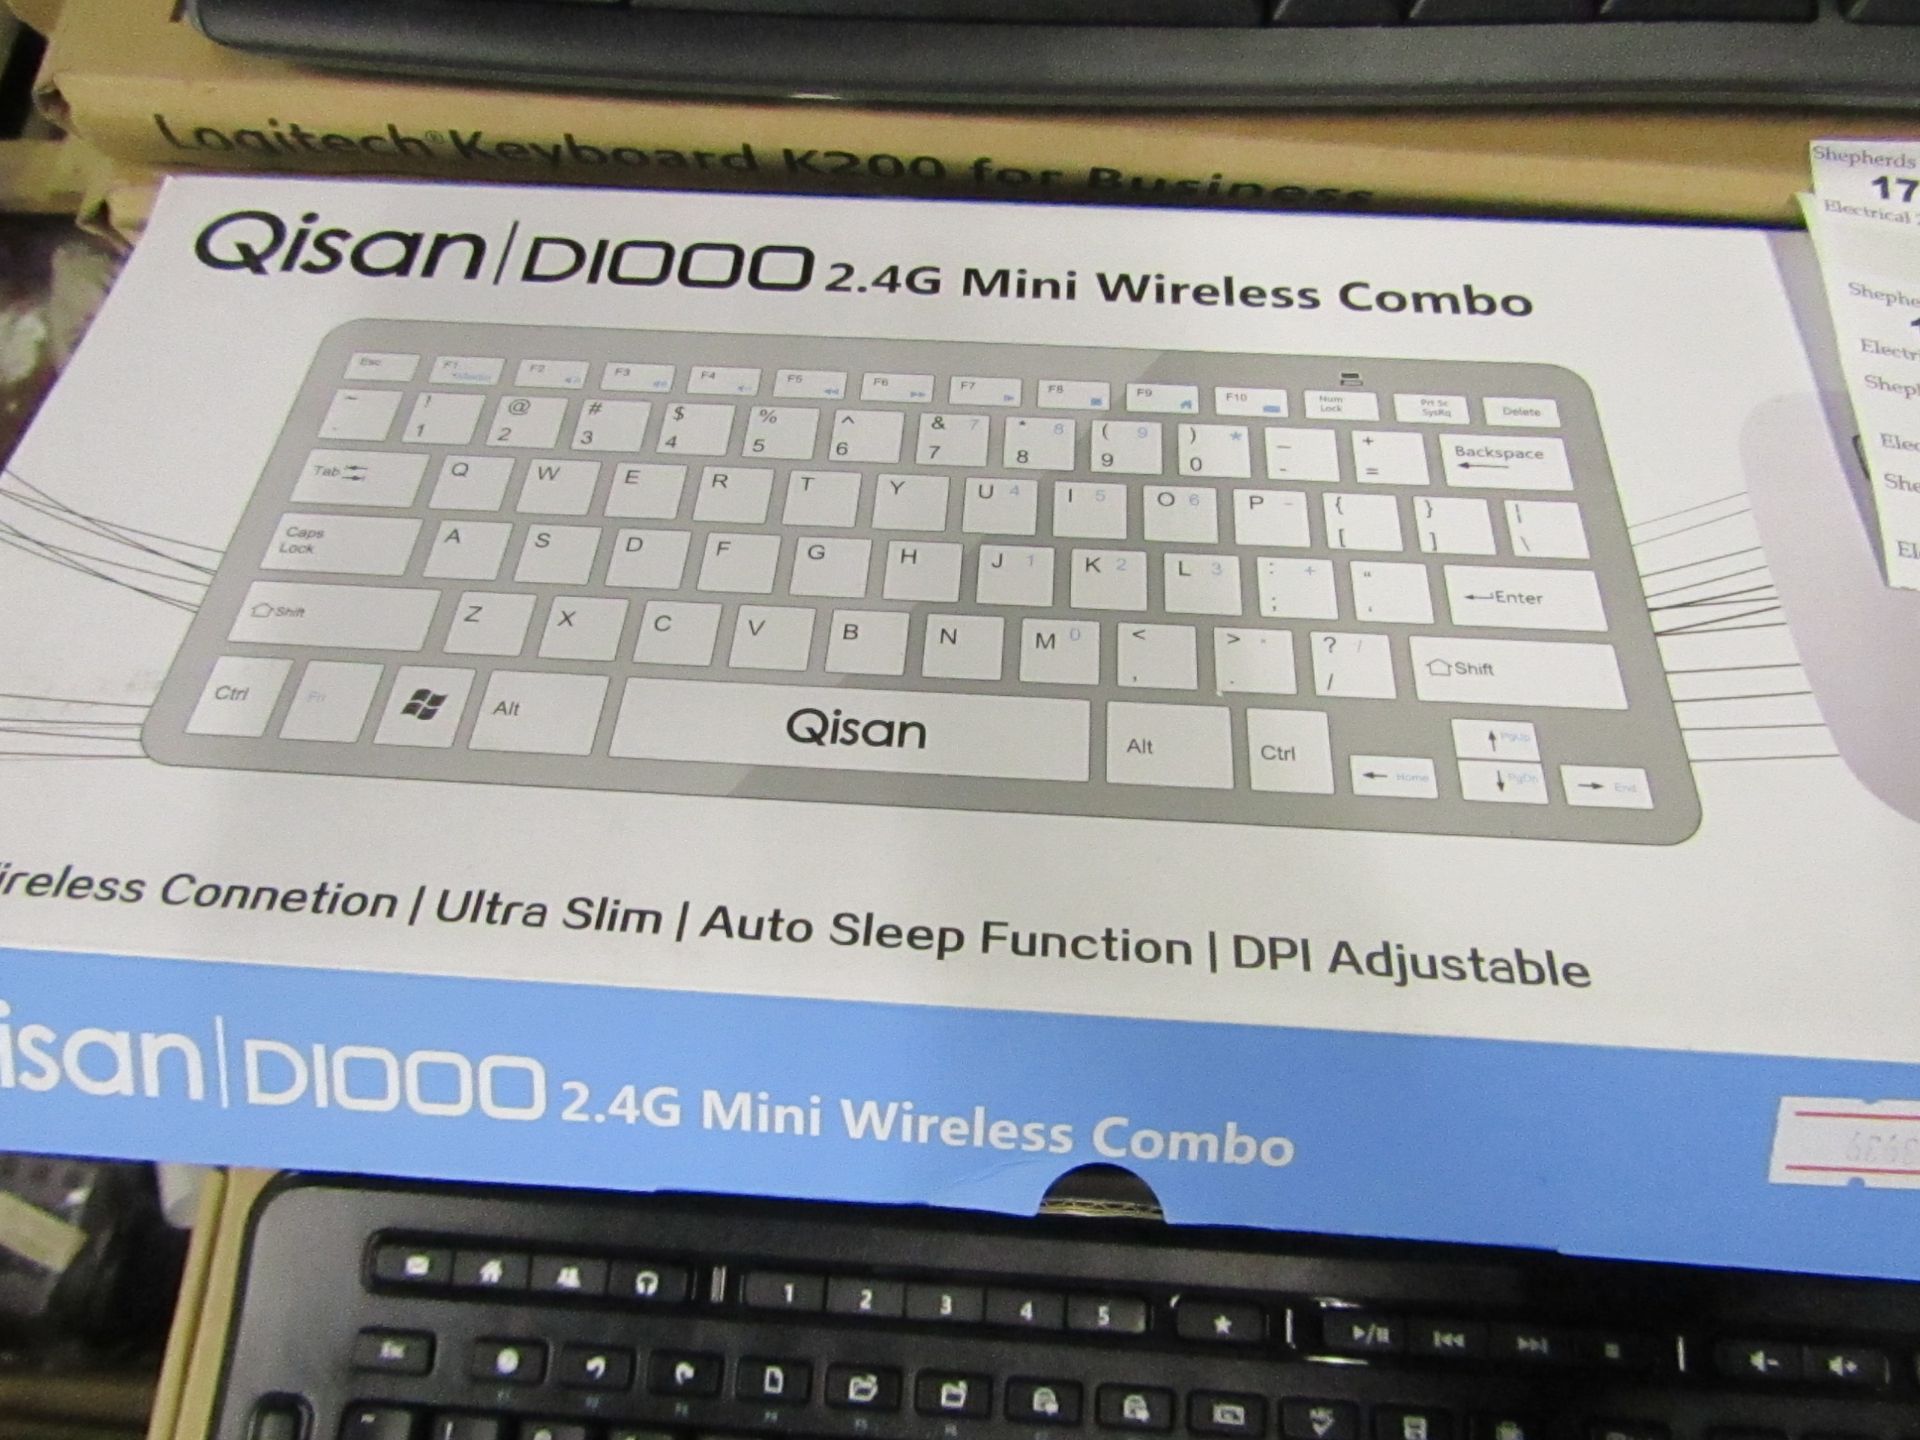 Qisan D1000 2.4g Mini Wireless Combo Keyboard & Mouse, packaged and boxed.